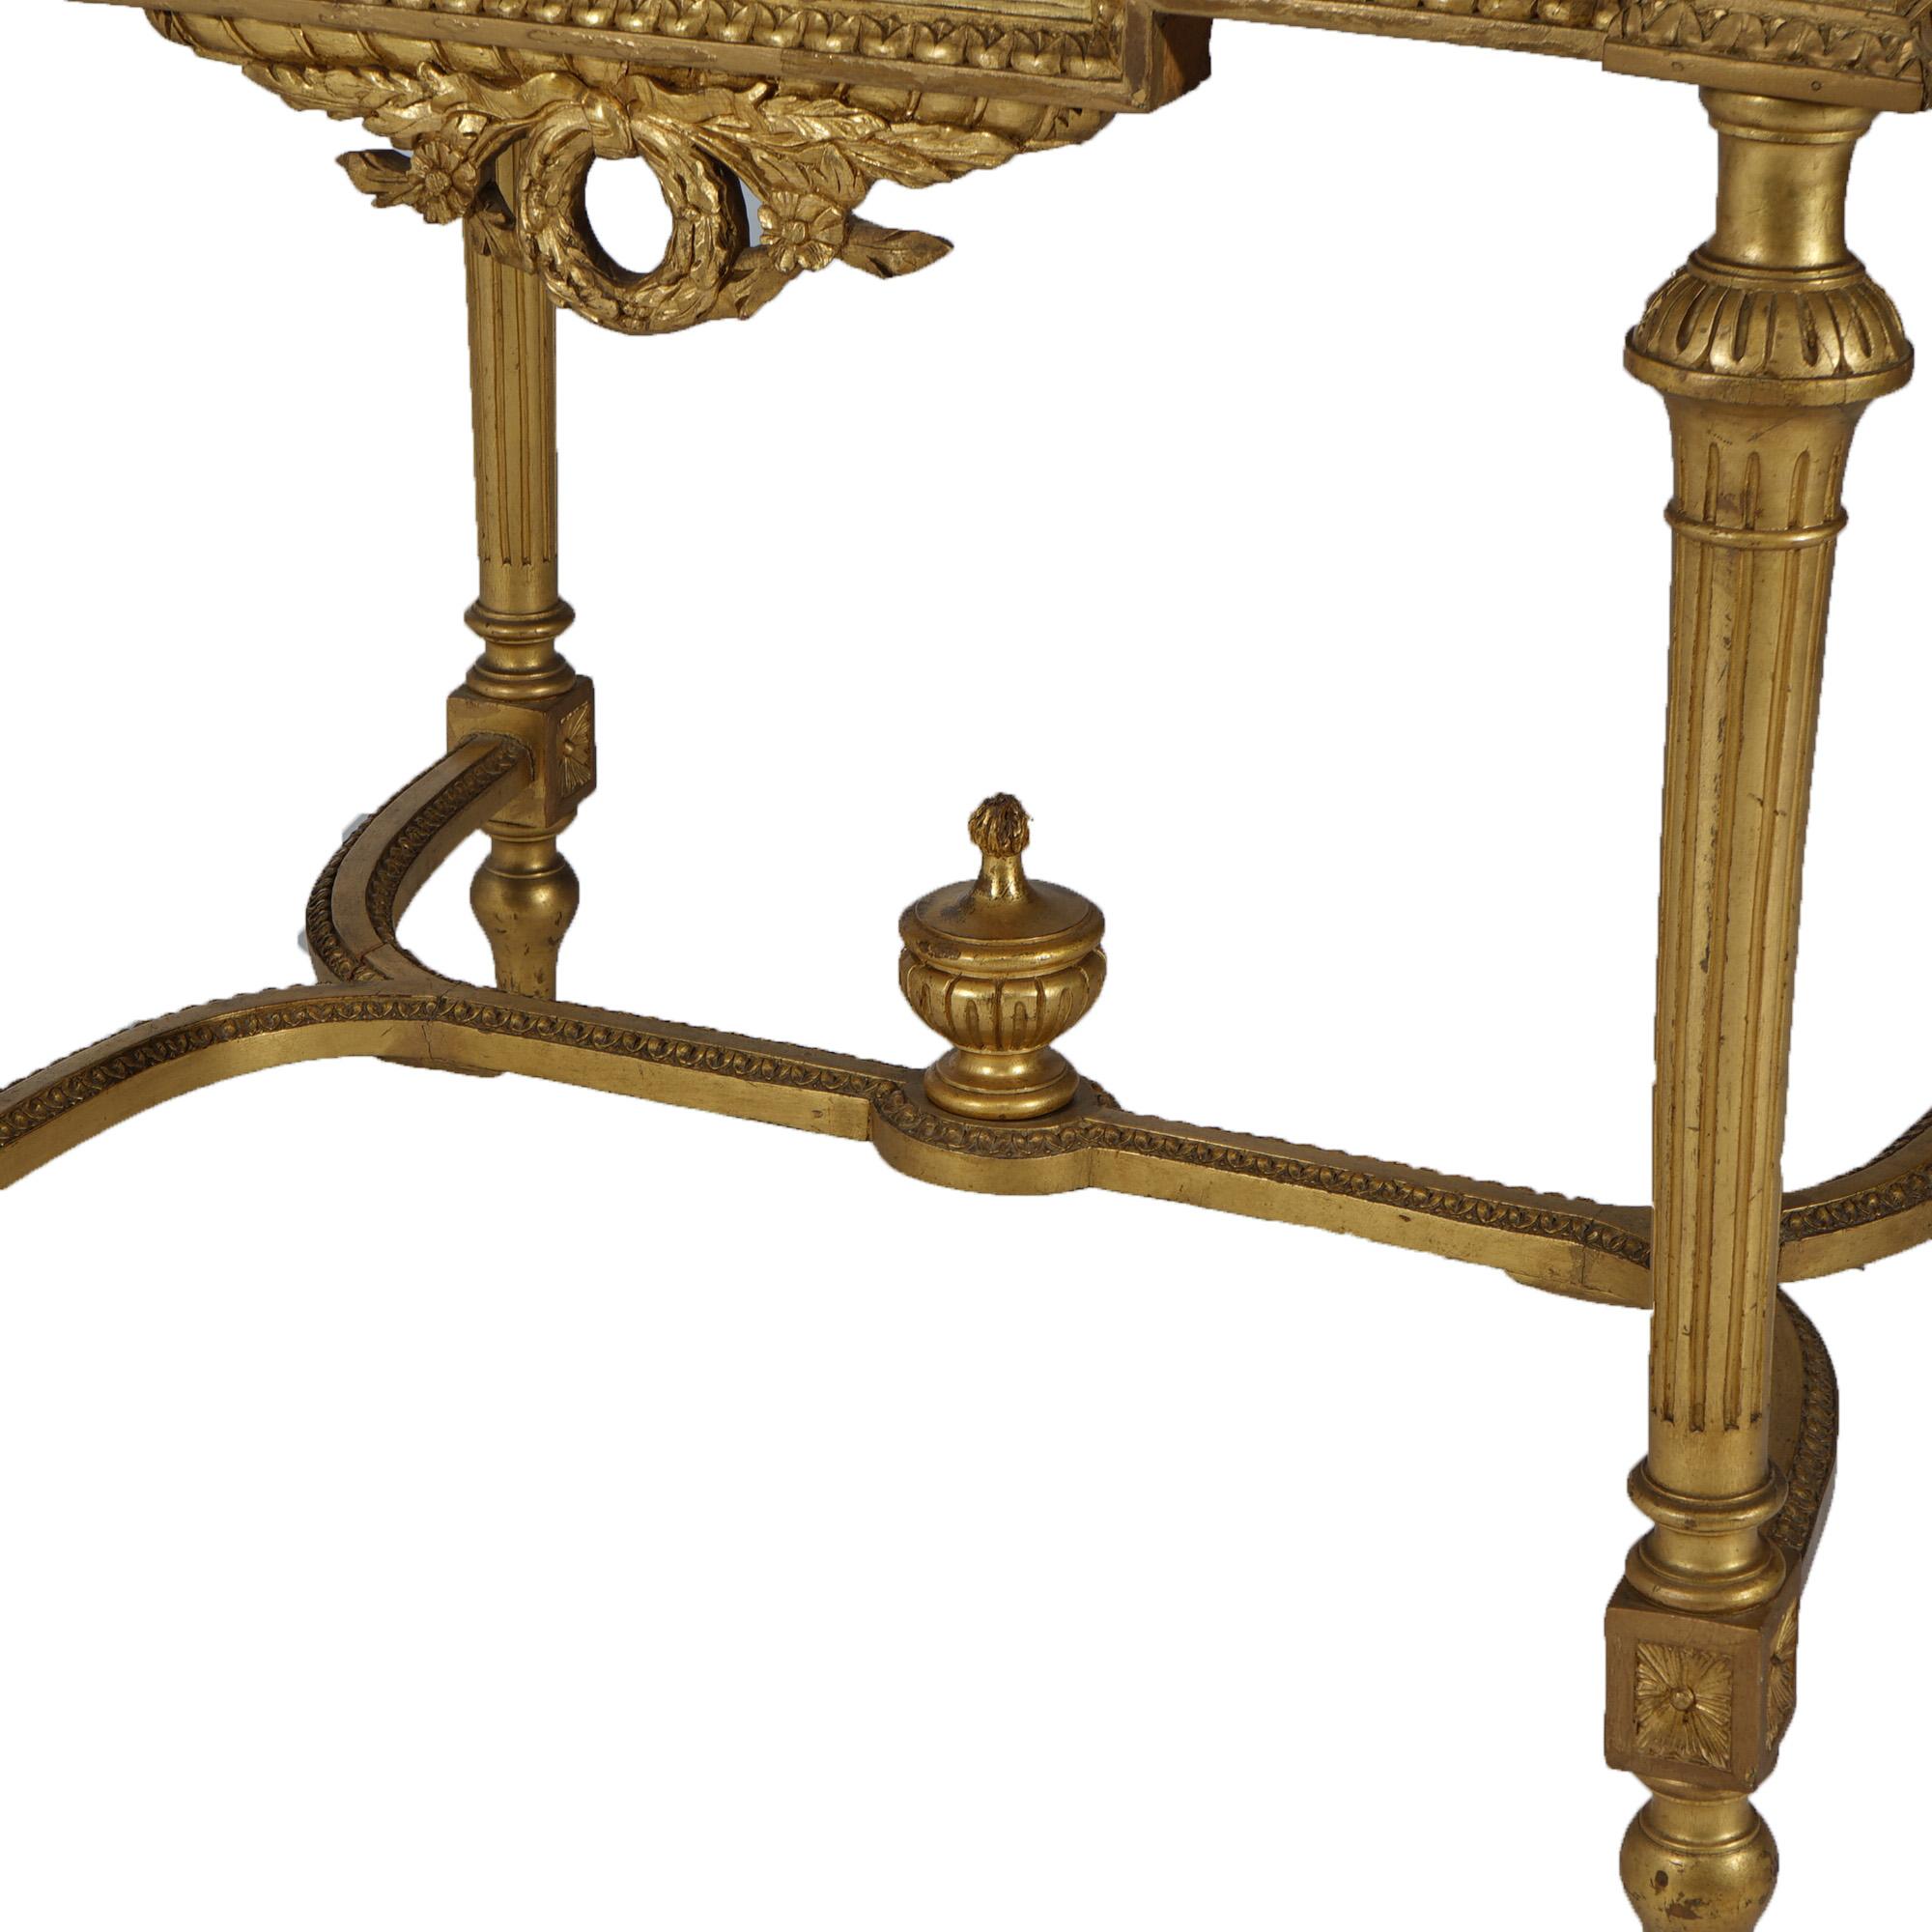 19th Century Antique French Louis XVI Style Giltwood Parlor Table with Faux Painted Top 19thC